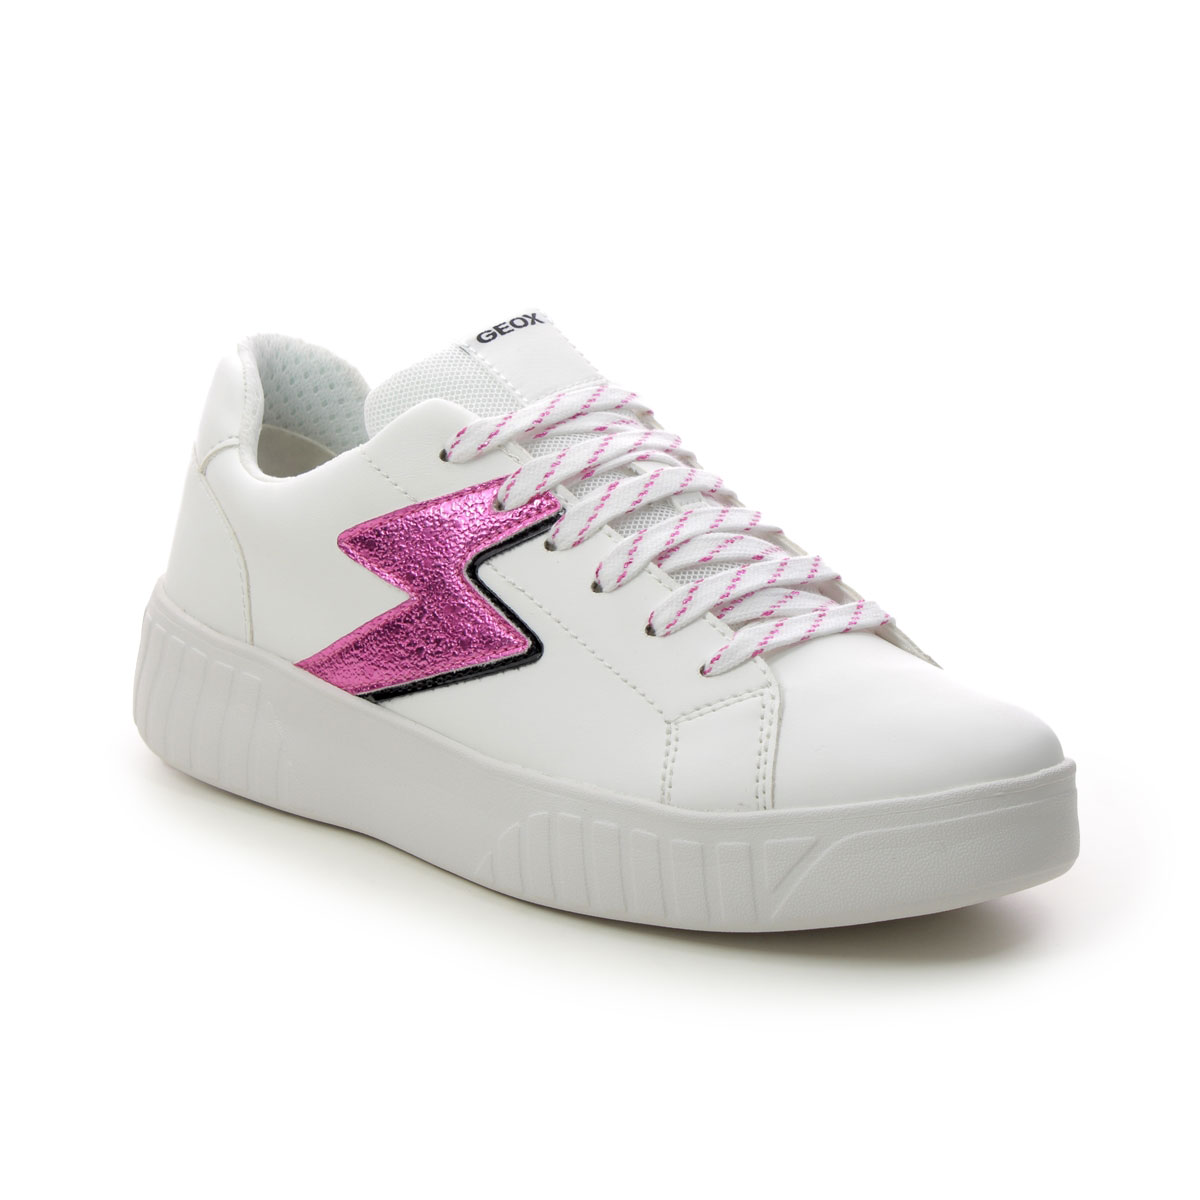 Geox Mikiroshi Lace White Pink Kids girls trainers J45DVA-C0563 in a Plain Man-made in Size 38